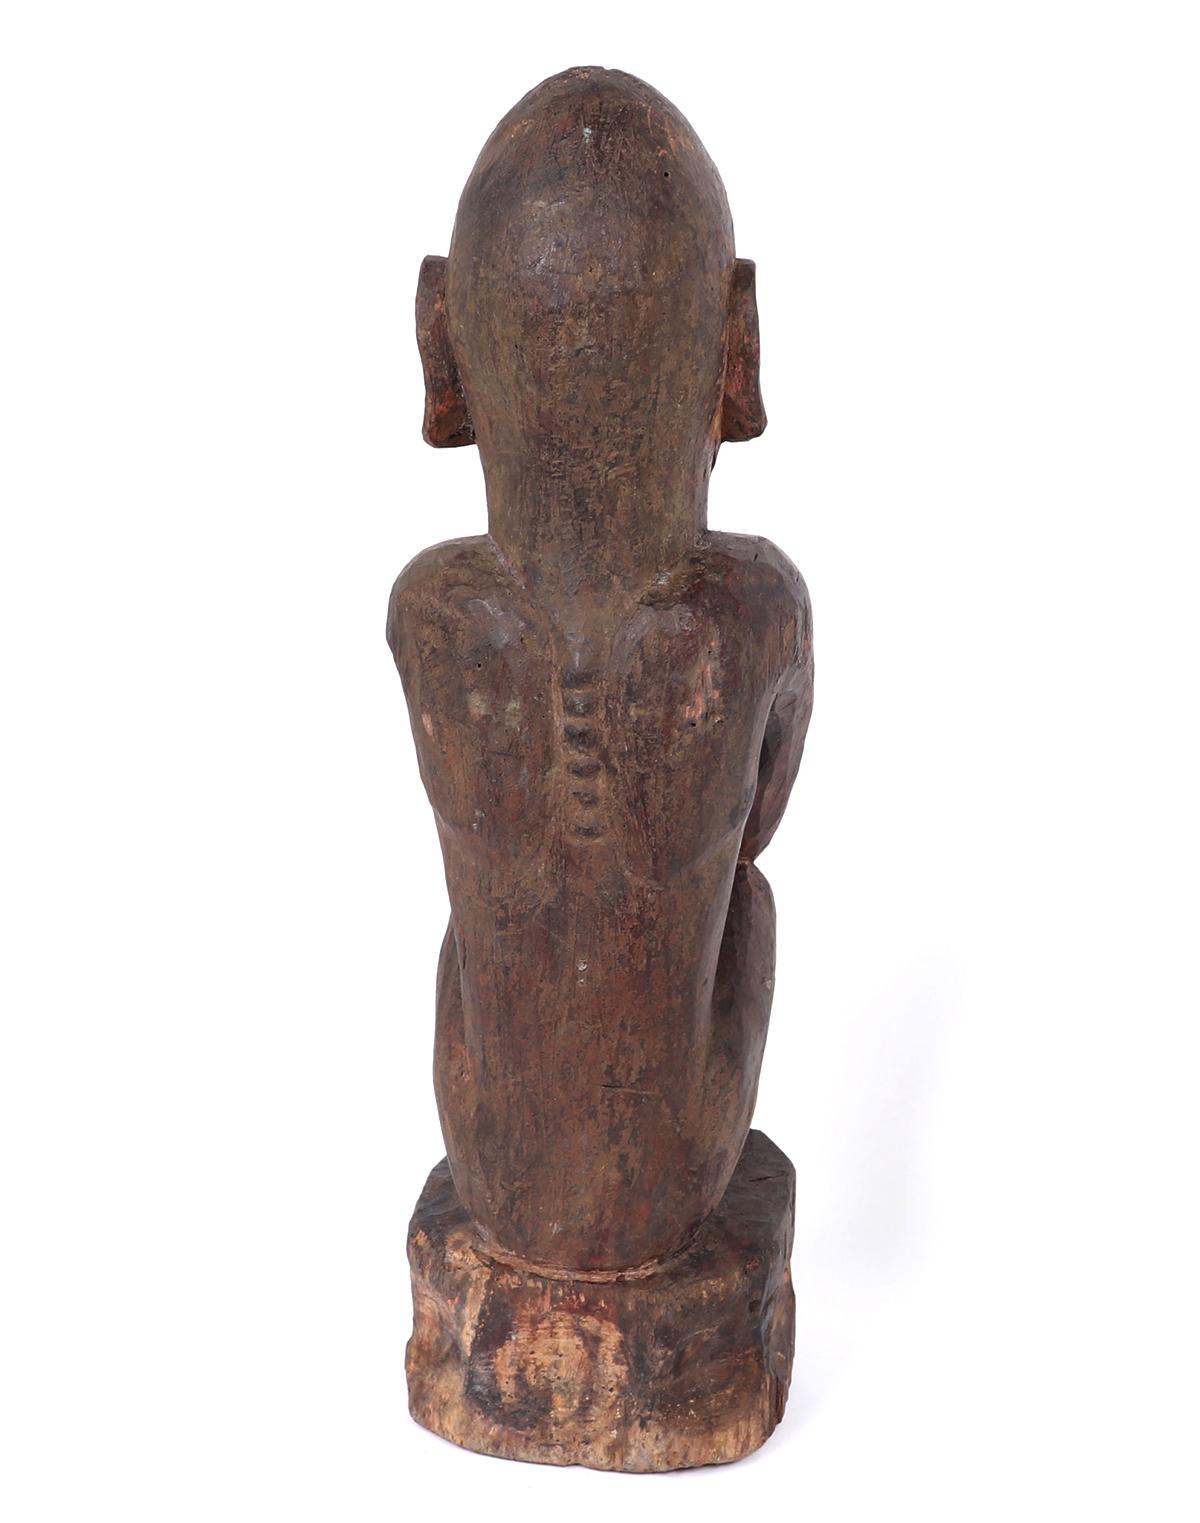 Philippines, Kankanay or Bontoc-carved Wooden House God Figure